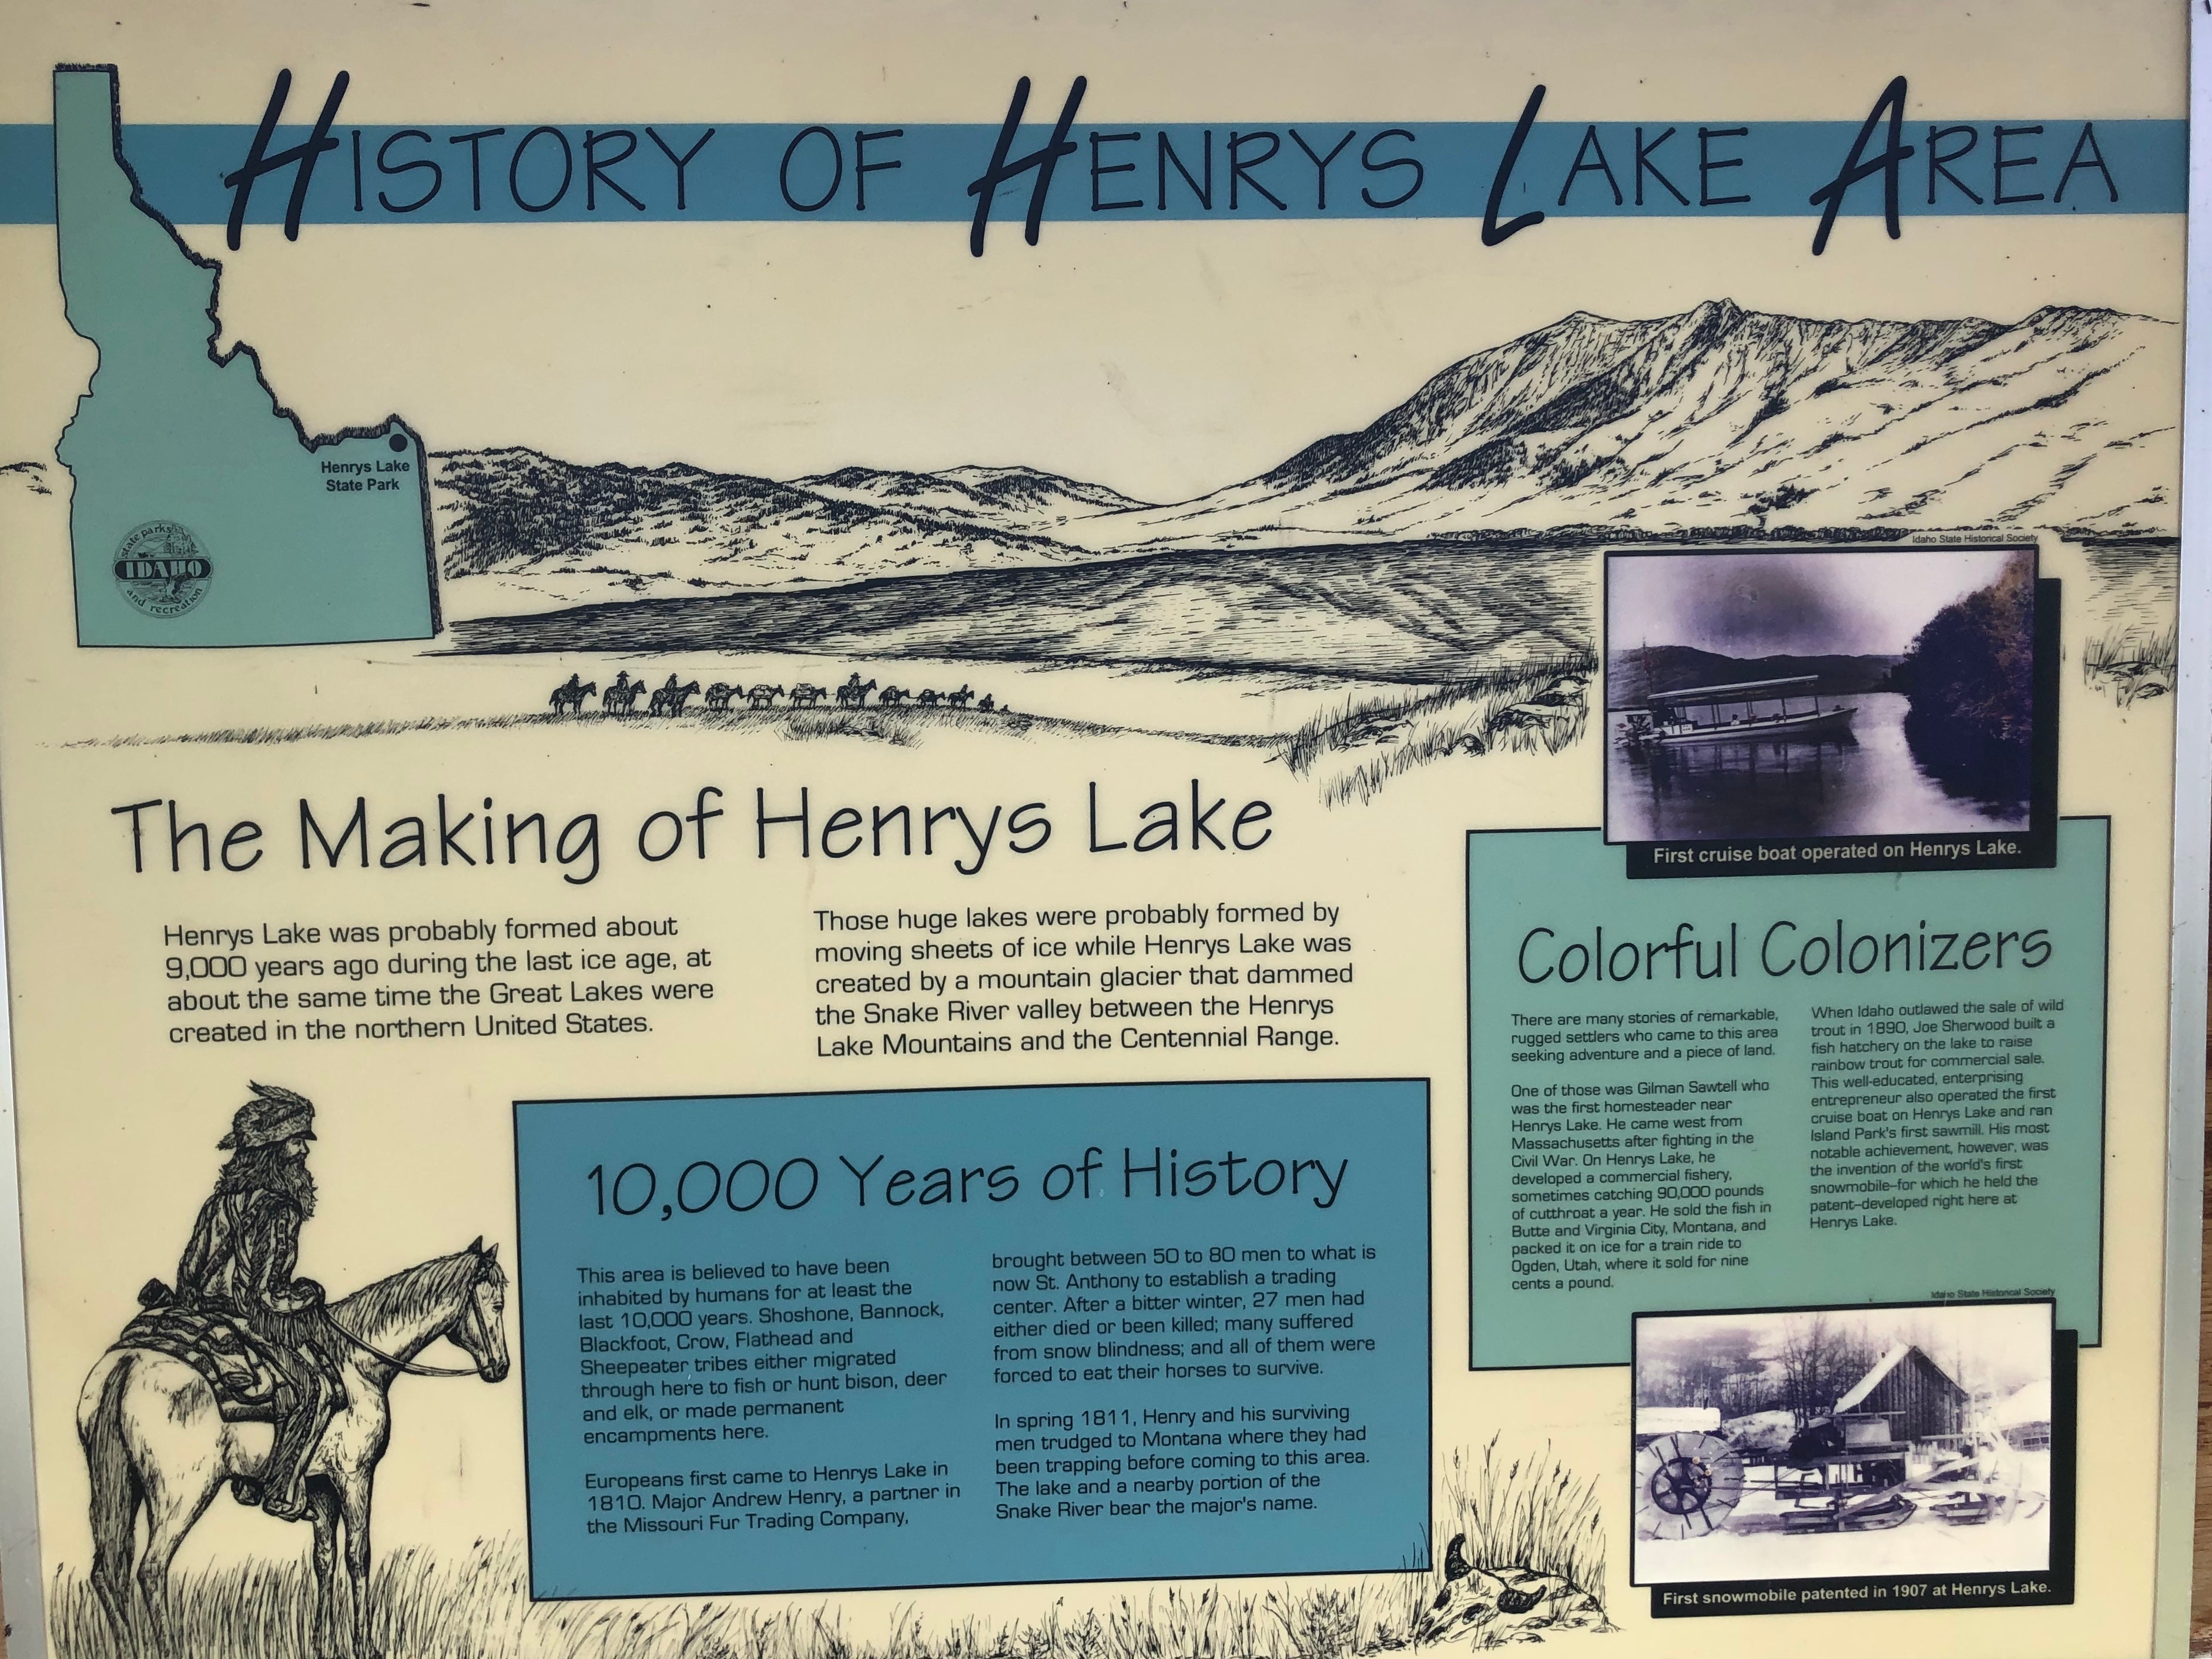 It was interesting to learn about the history of Henry's Lake